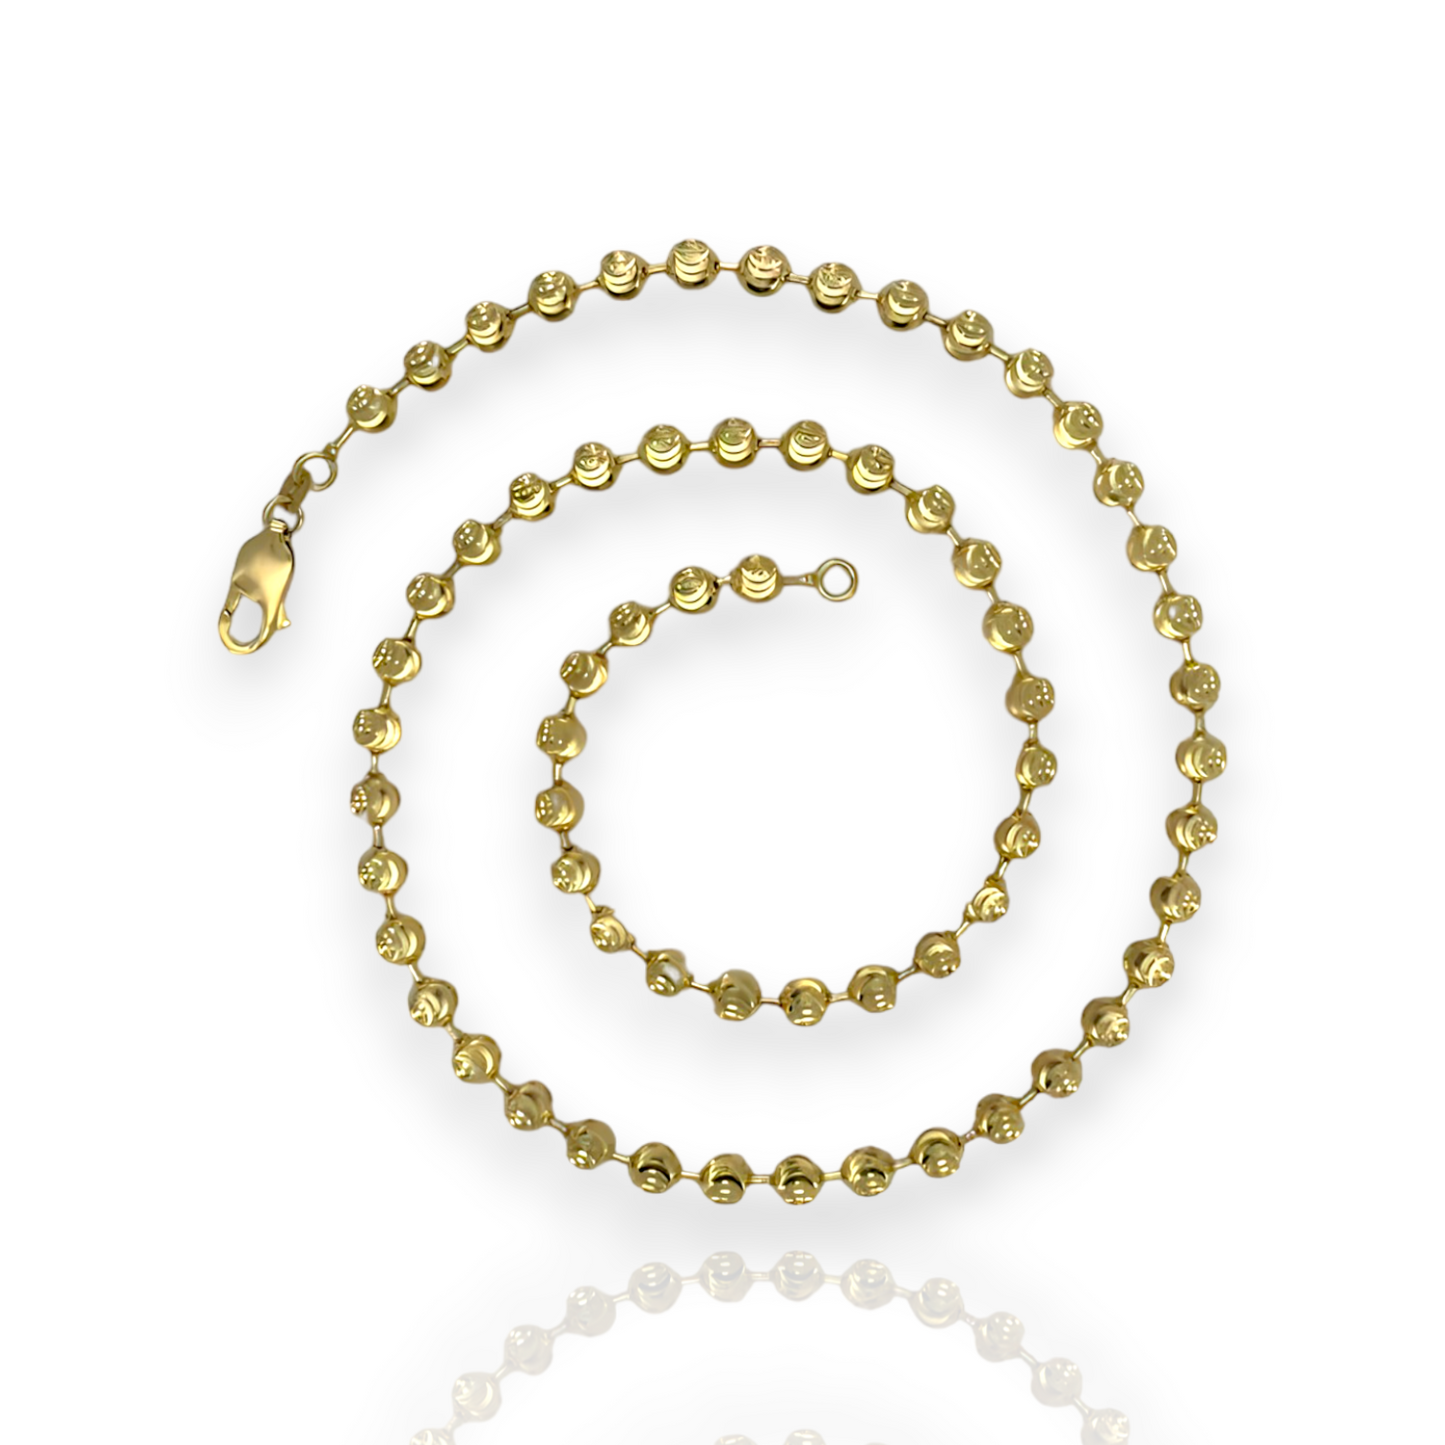 Bead Ball Moon Cut Link Chain Necklace - 14K Yellow Gold - Solid